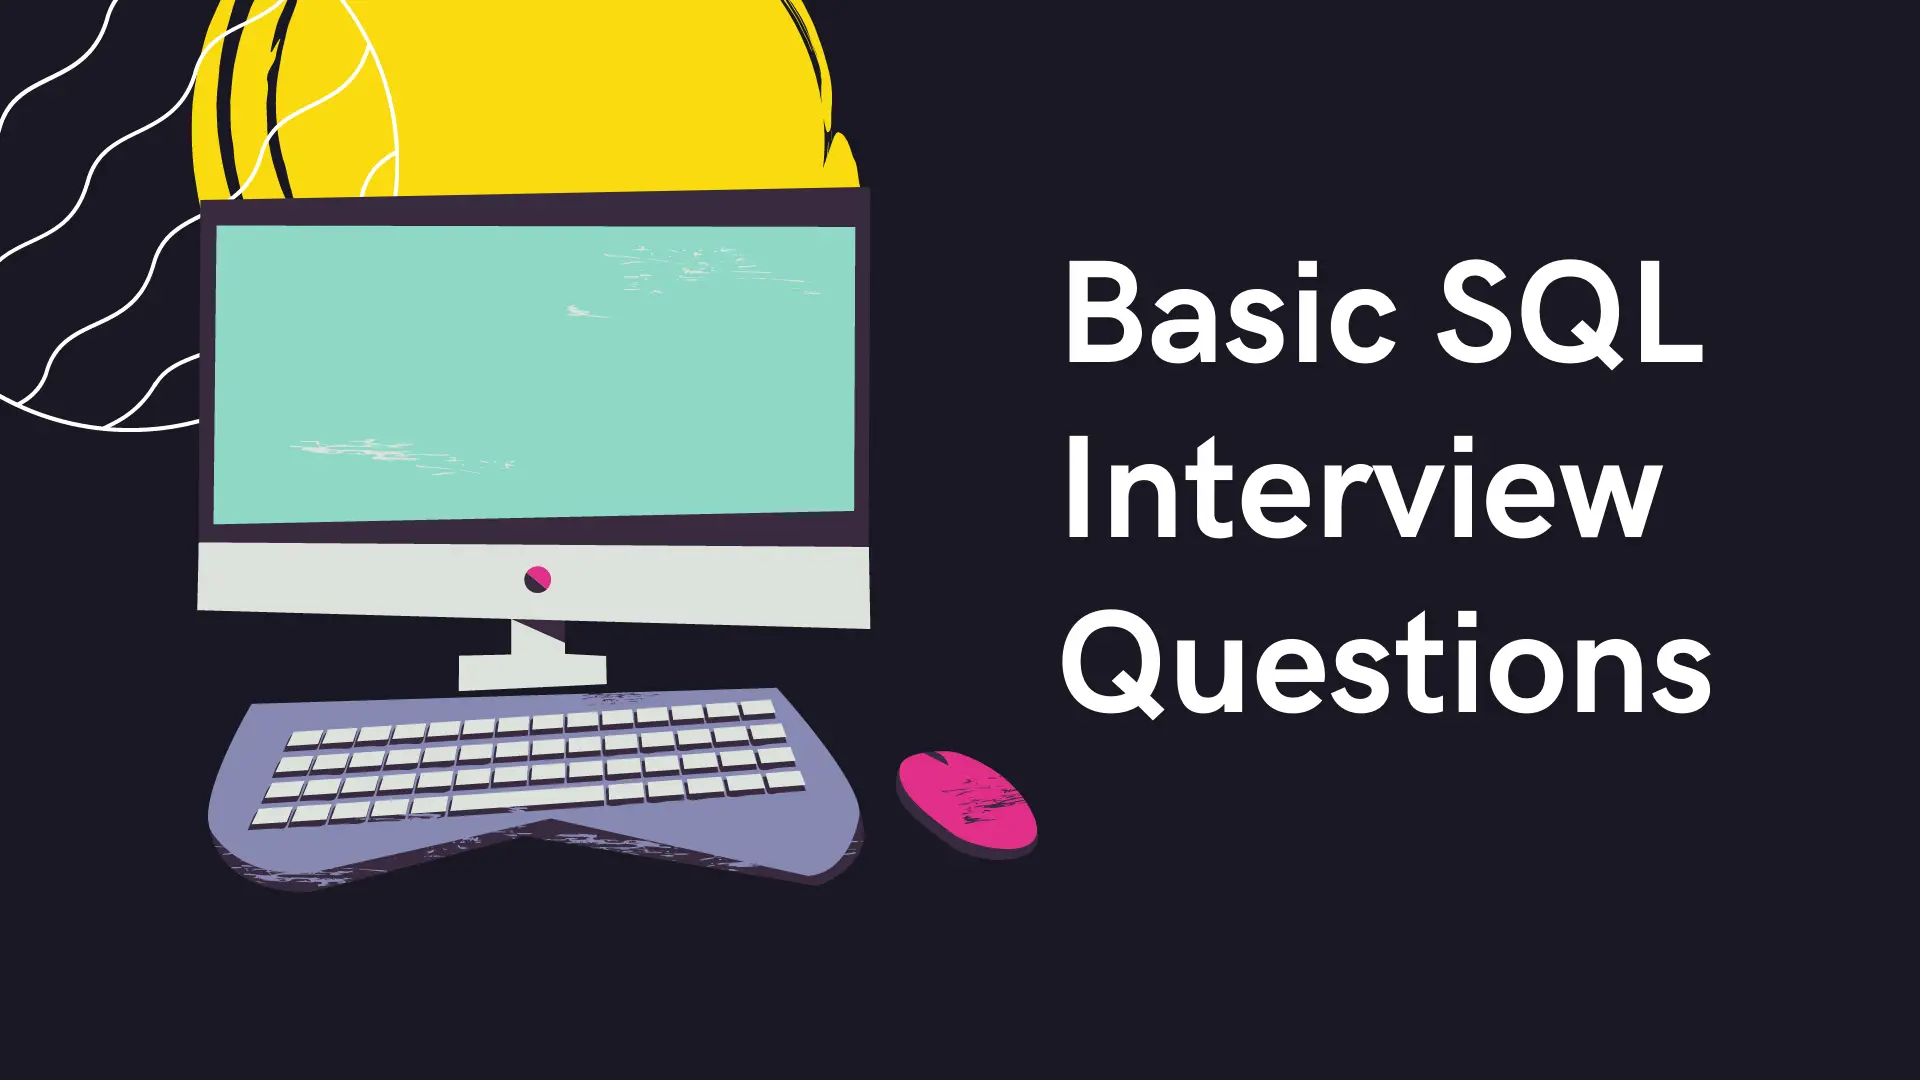 Basic SQL Interview Questions